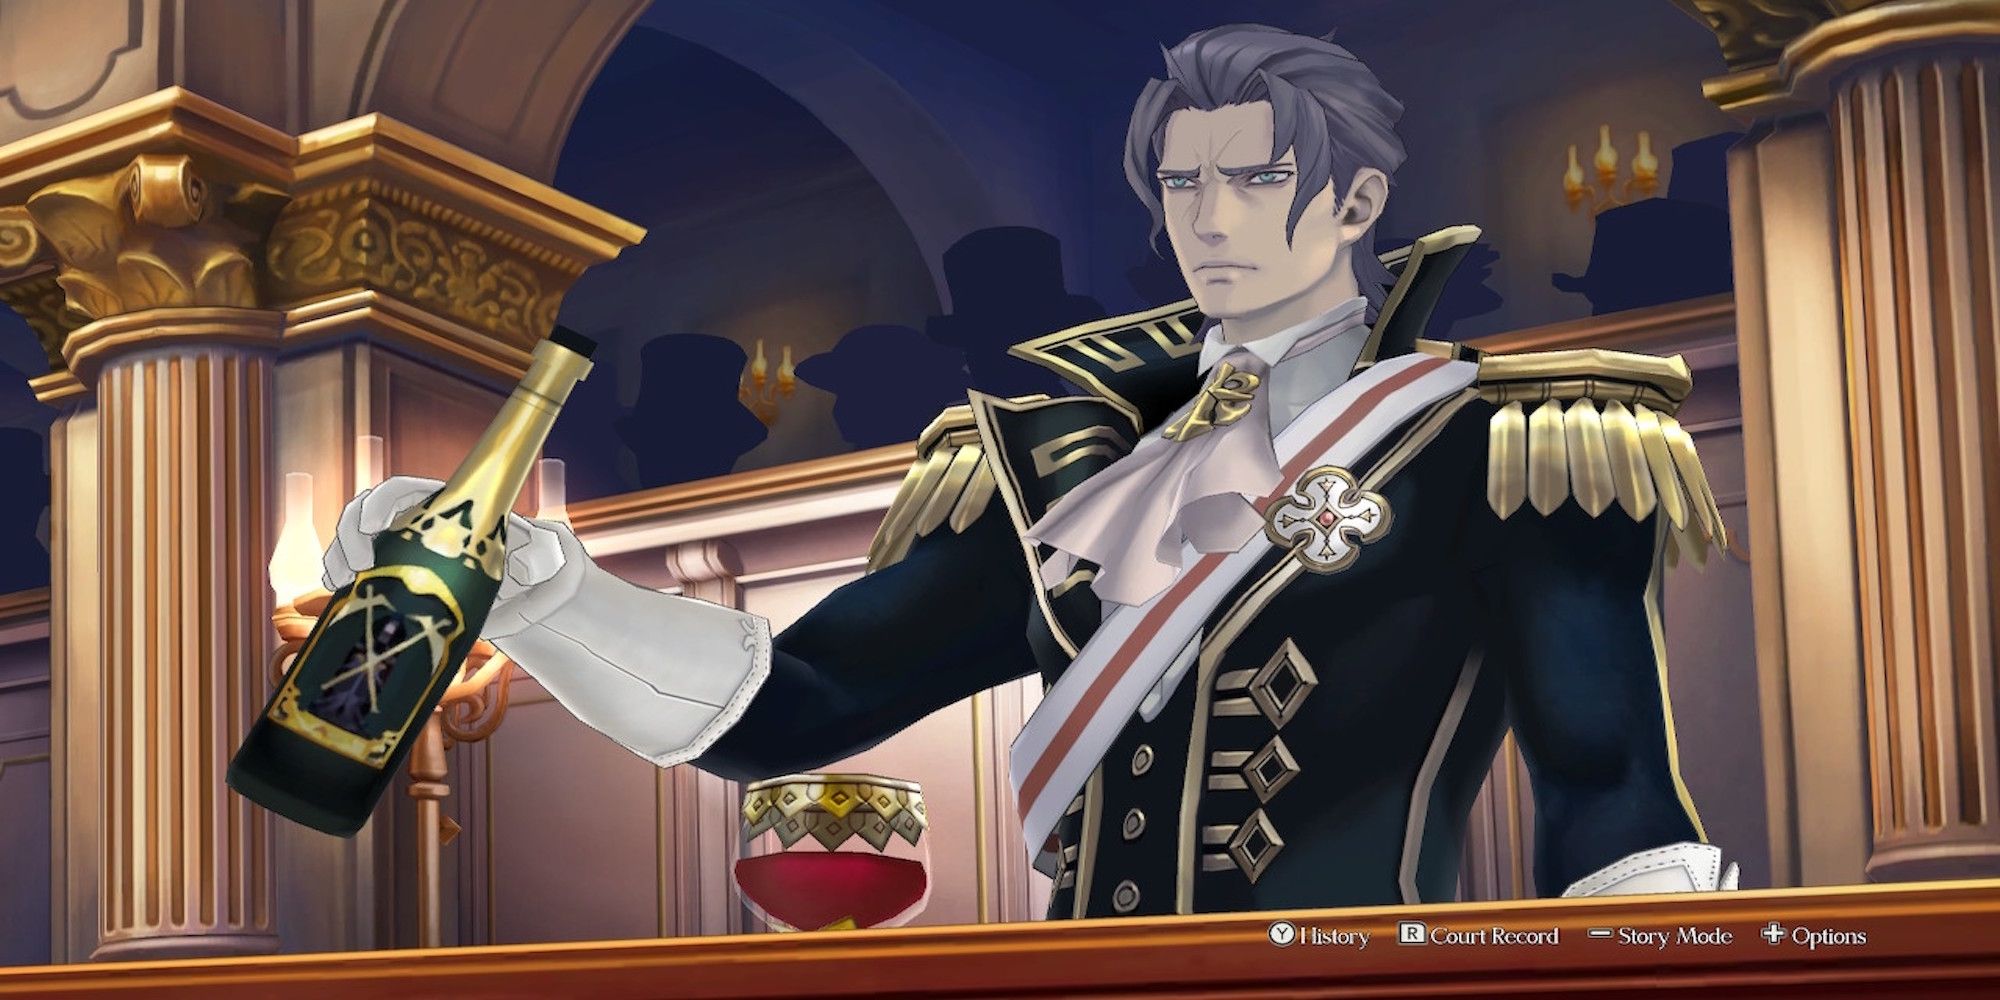 Van Zieks from The Great Ace Attorney Chronicles